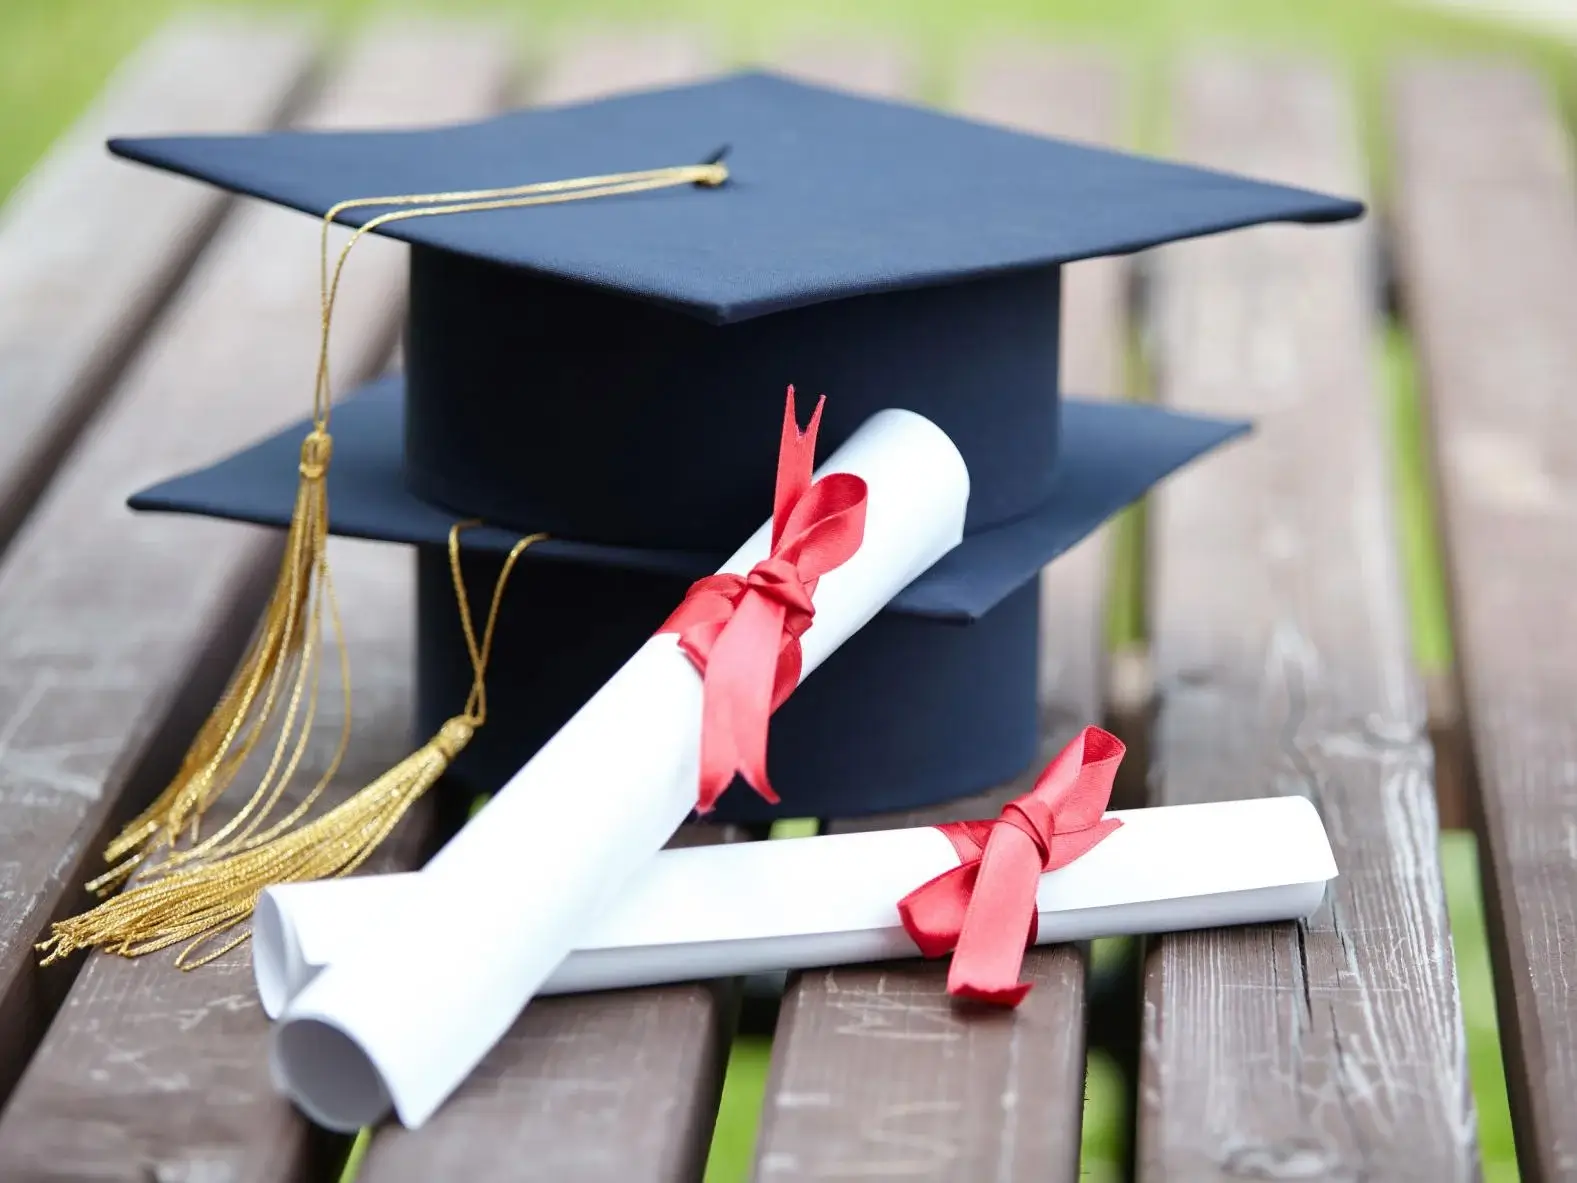 attestaion of diploma certificates in the UAE